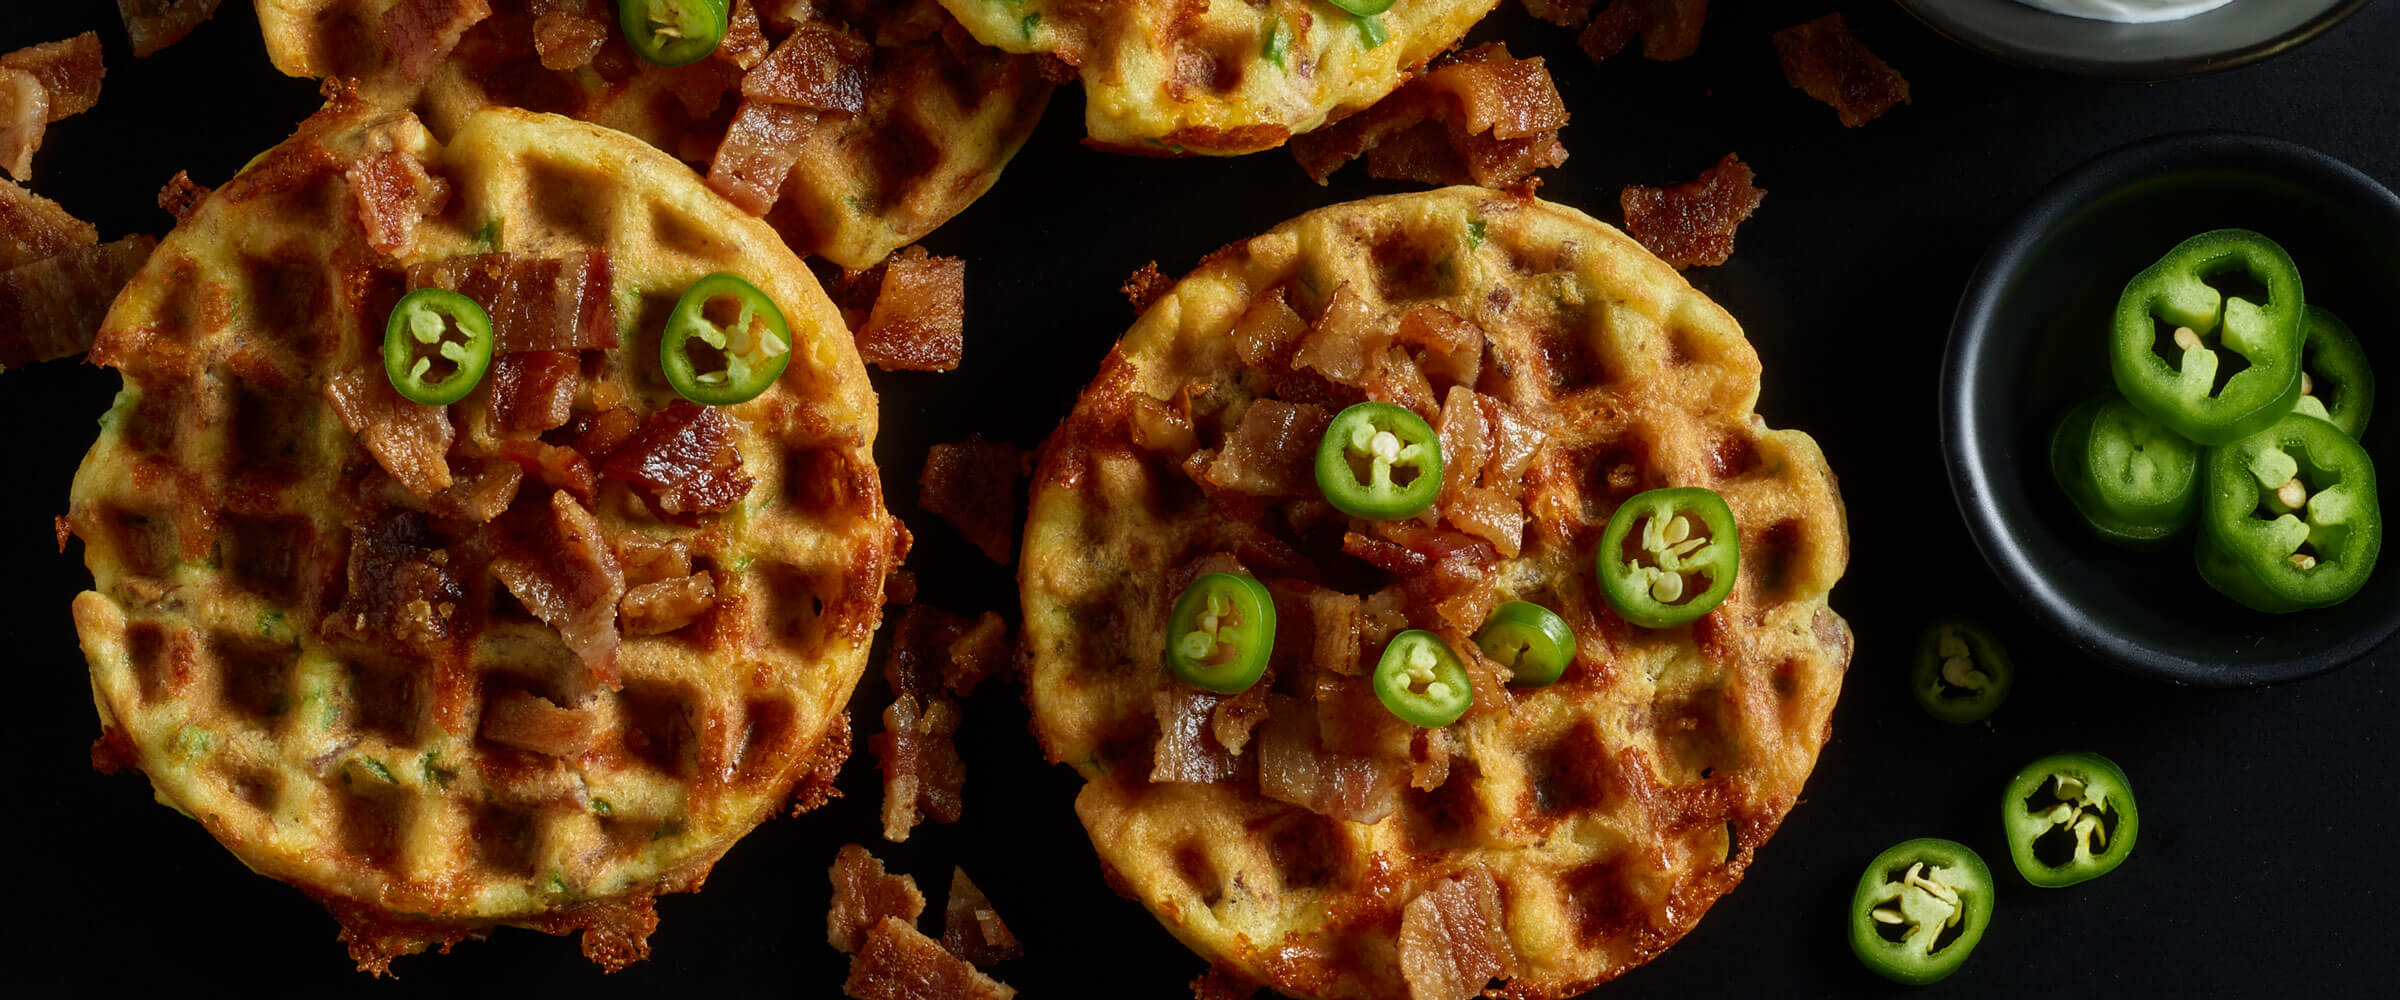 Bacon, Cheddar and Jalapeno Chaffles with extra jalapenos